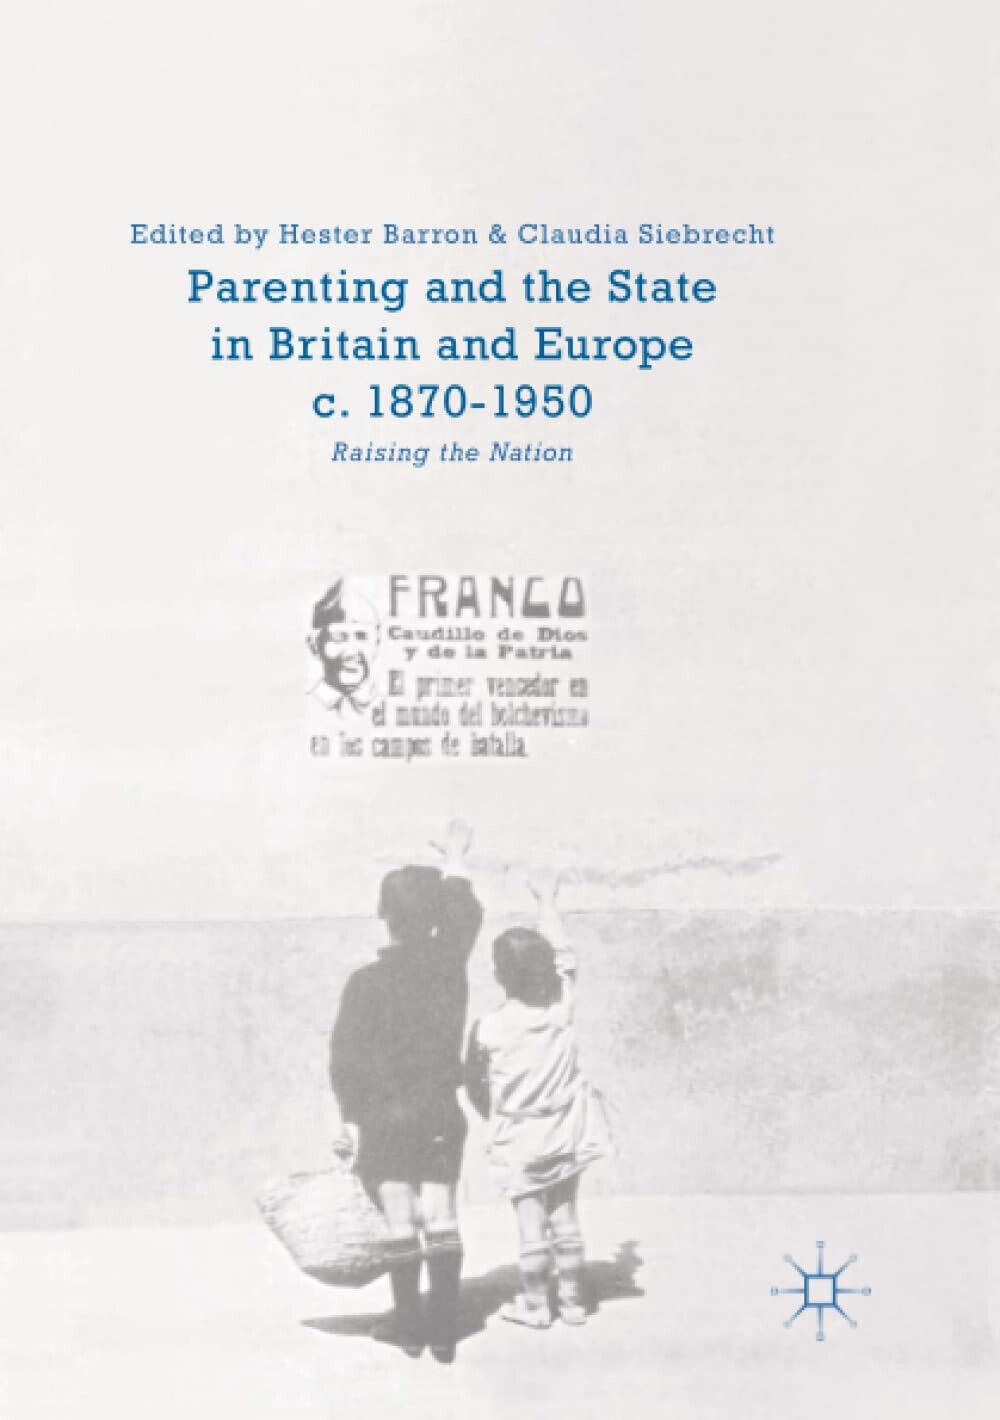 Parenting and the State in Britain and Europe, c. 1870-1950 - Palgrave, 2018 libro usato